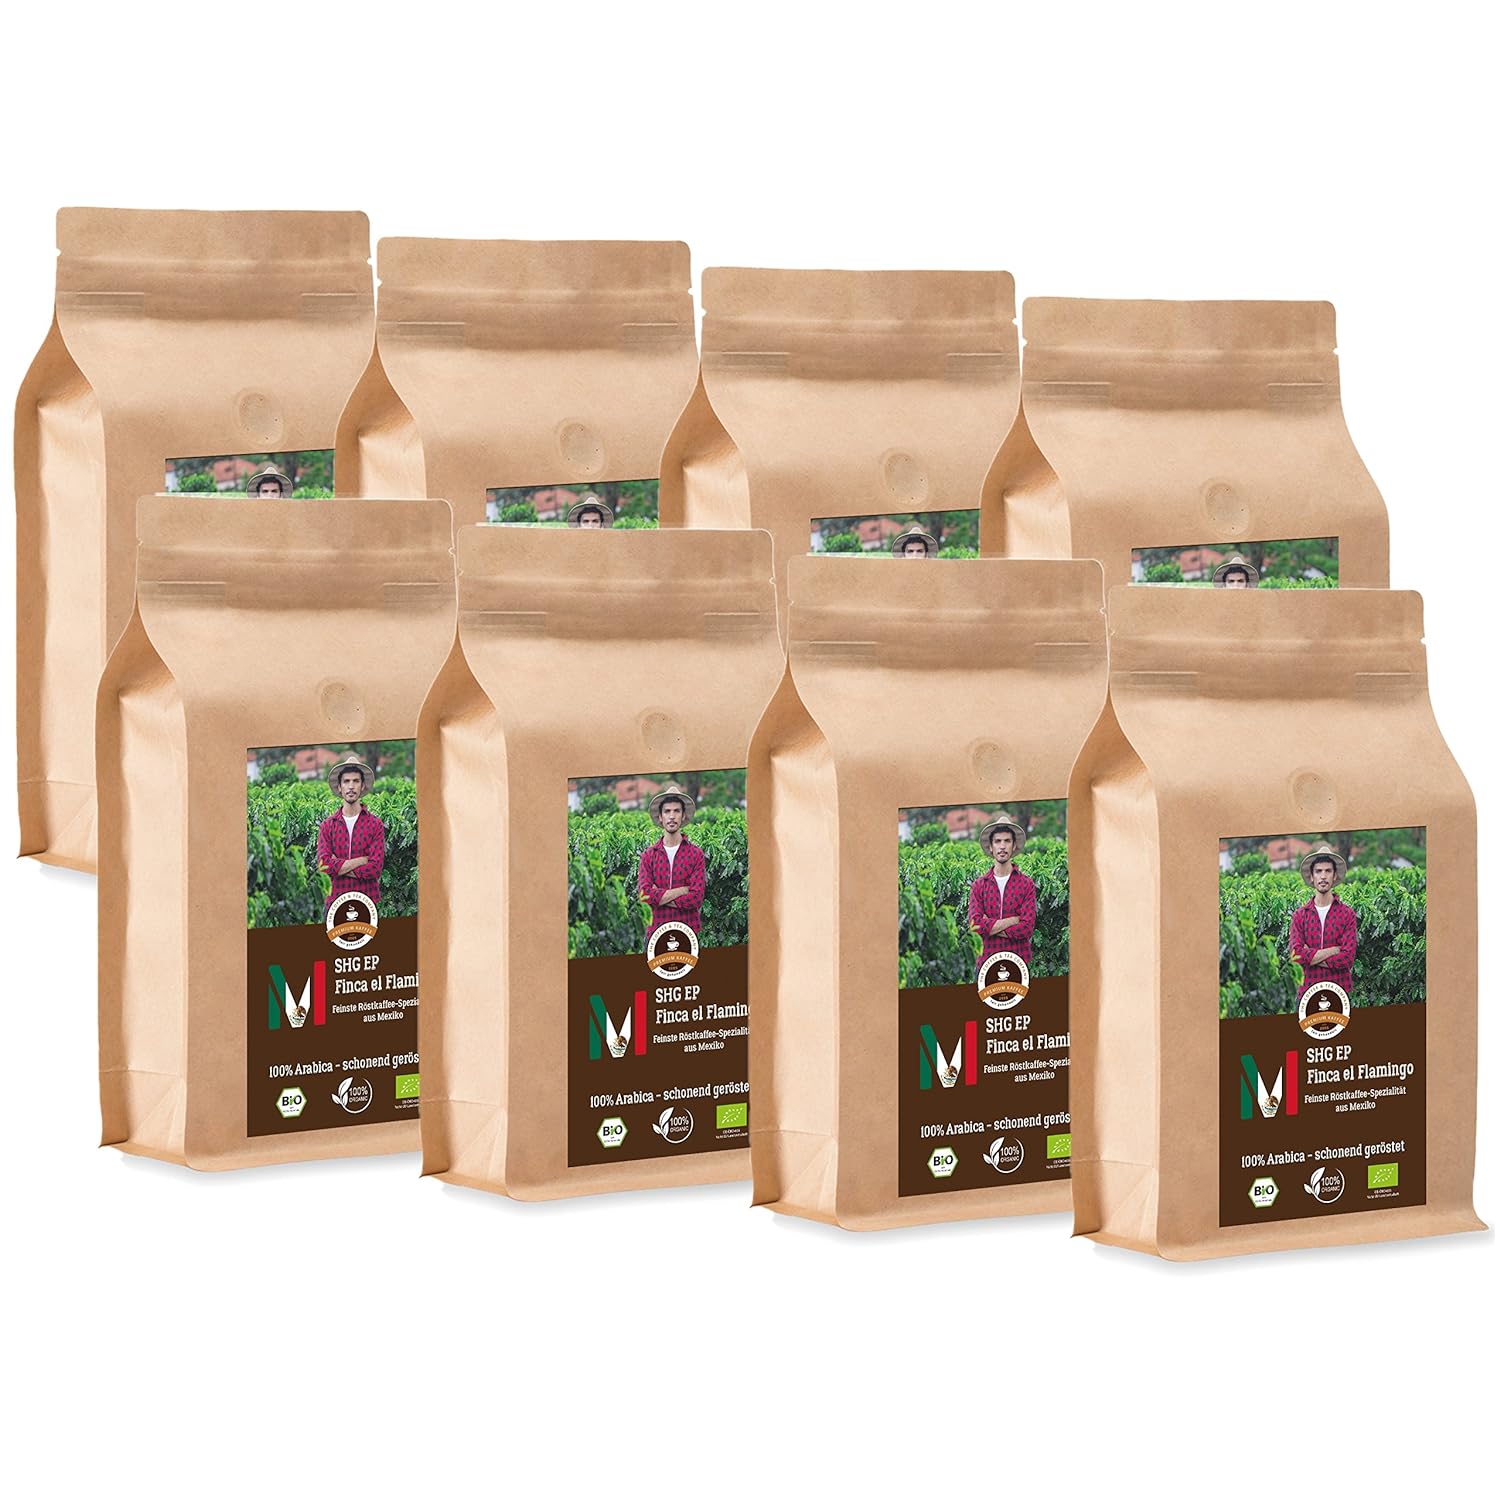 Coffee Globetrotter - Bio Mexico Finca El Flamingo - 8 x 1000 g Medium Ground - for Fully Automatic Coffee Grinder - Roasted Coffee from Organic Cultivation | Gastropack Economy Pack